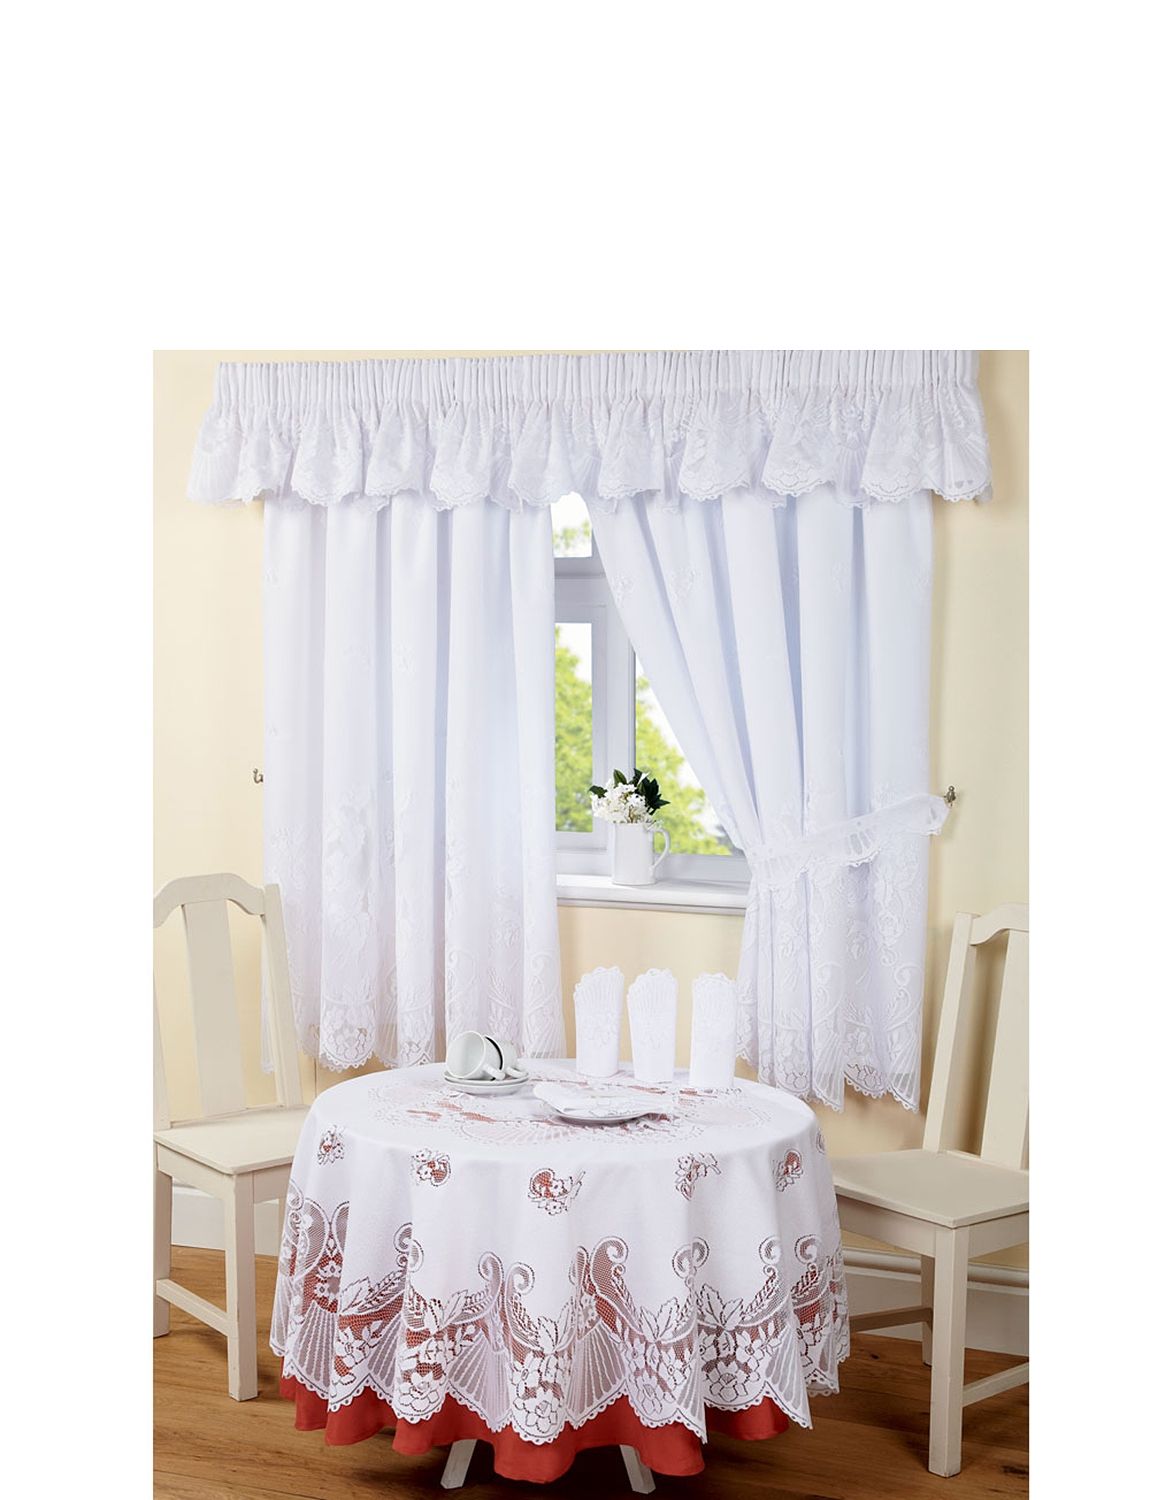 Victoria Lined Lace Curtain Sets Tablecloths Chums Regarding Lace Curtain Sets (View 4 of 25)